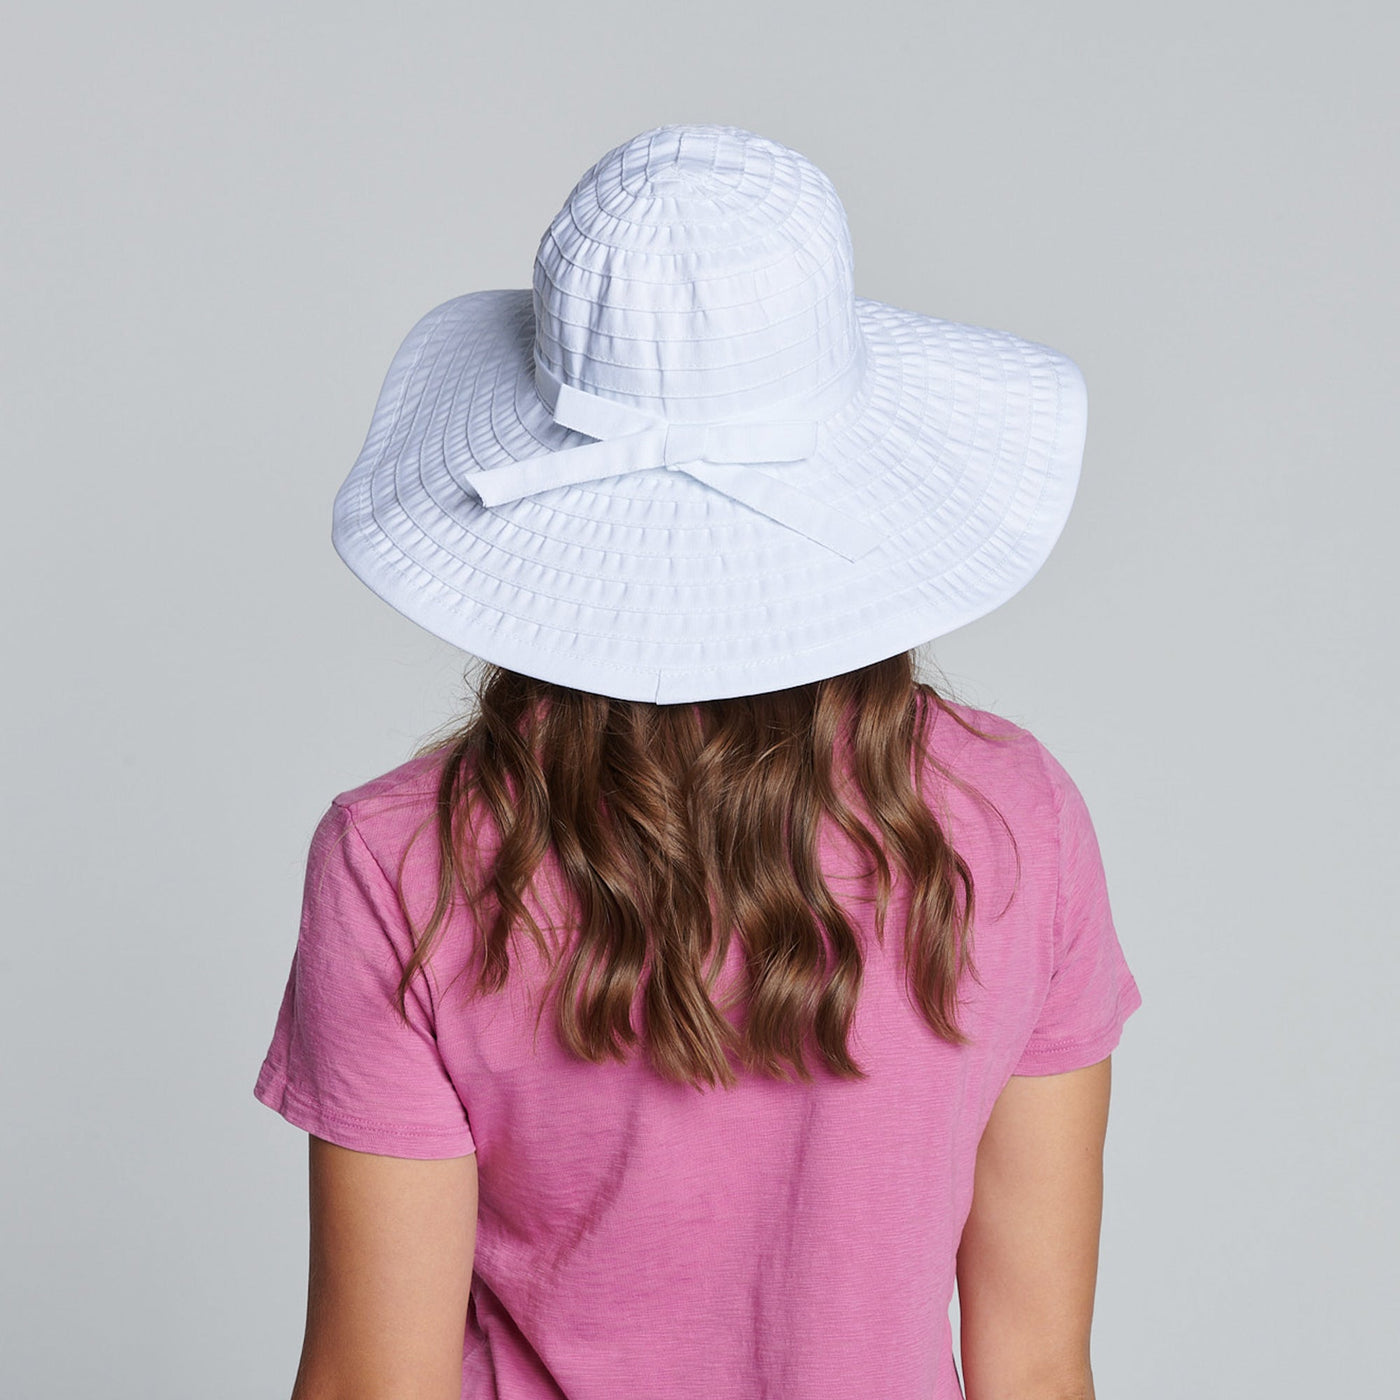 RIBBON - Women's Large Brim Ribbon Hat With A Bow